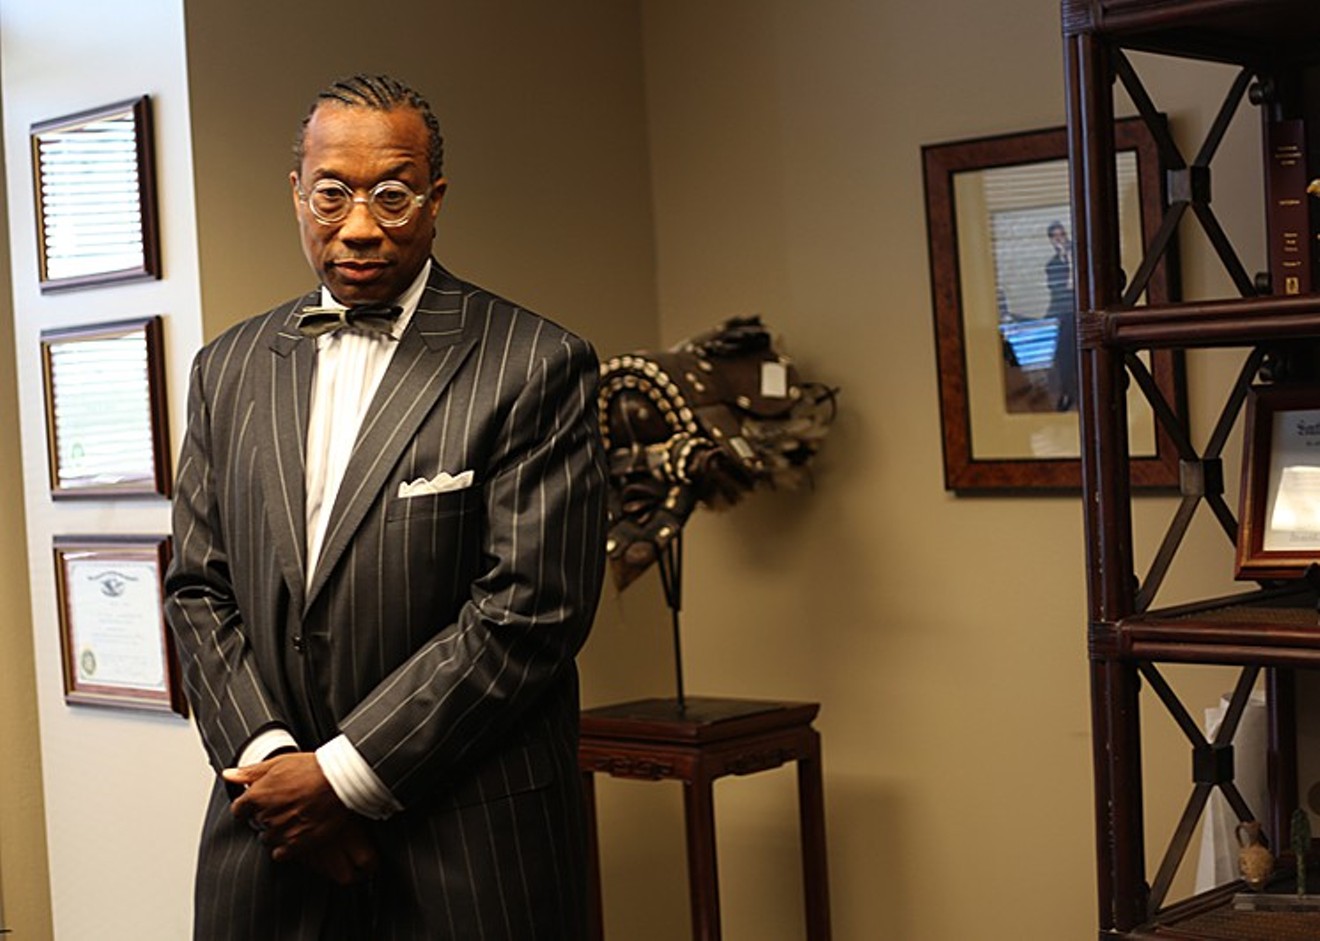 Who loves John  Wiley Price? A long-awaited federal corruption trial may turn on that issue more than any other.